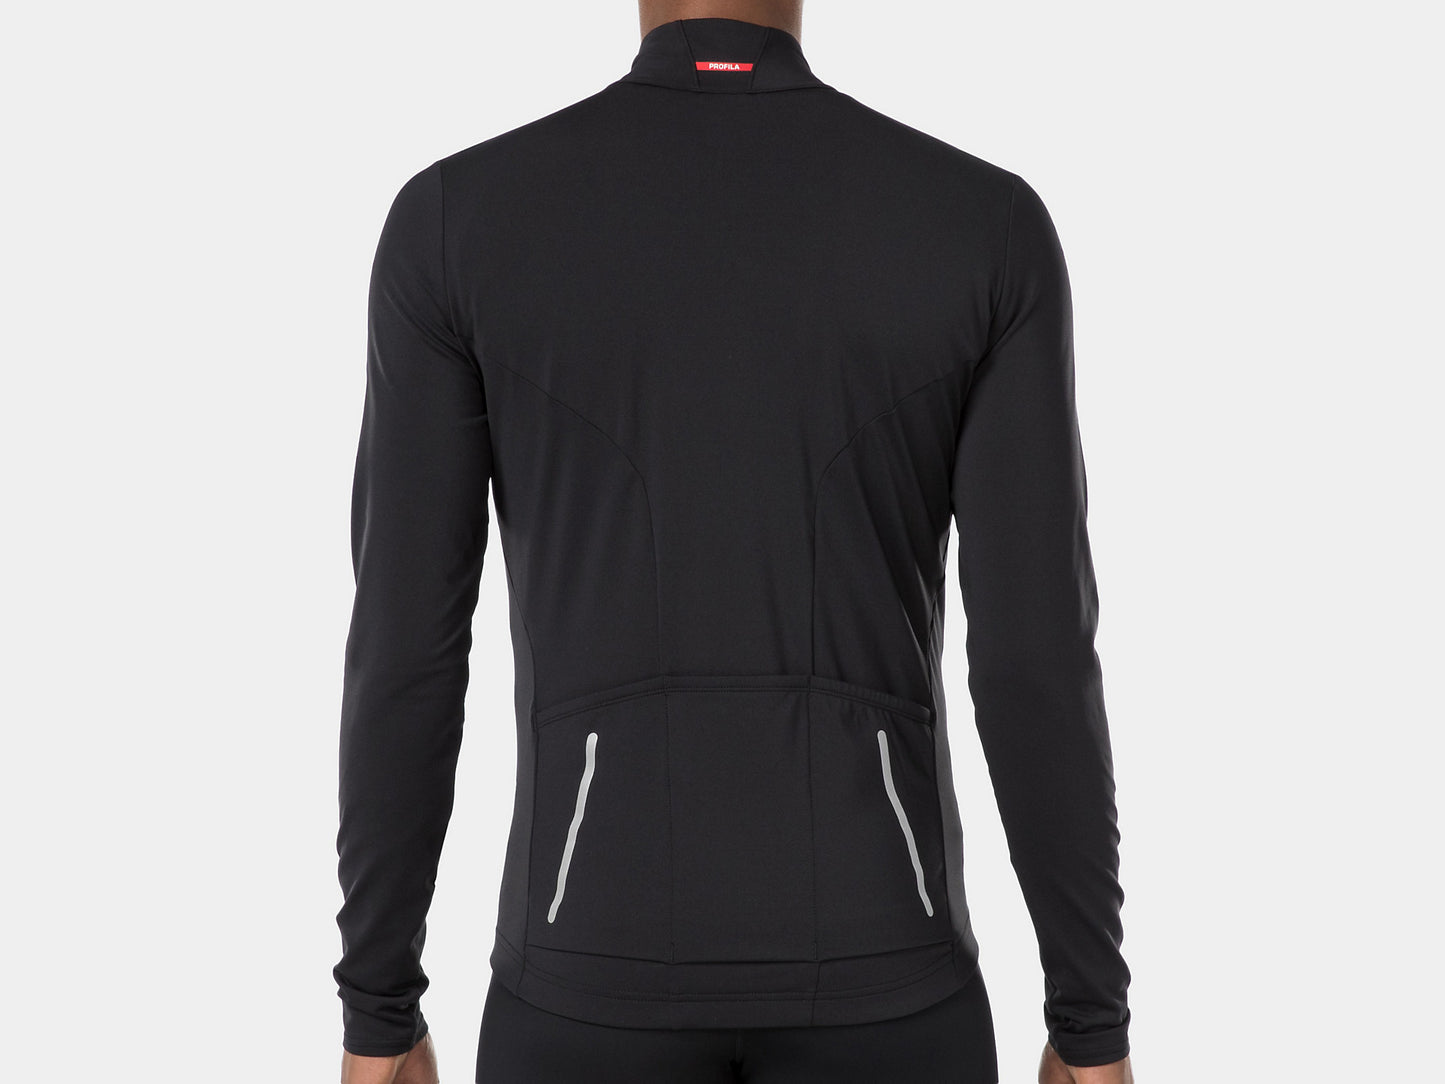 Bontrager Velocis Thermal Long Sleeve Cycling Jersey